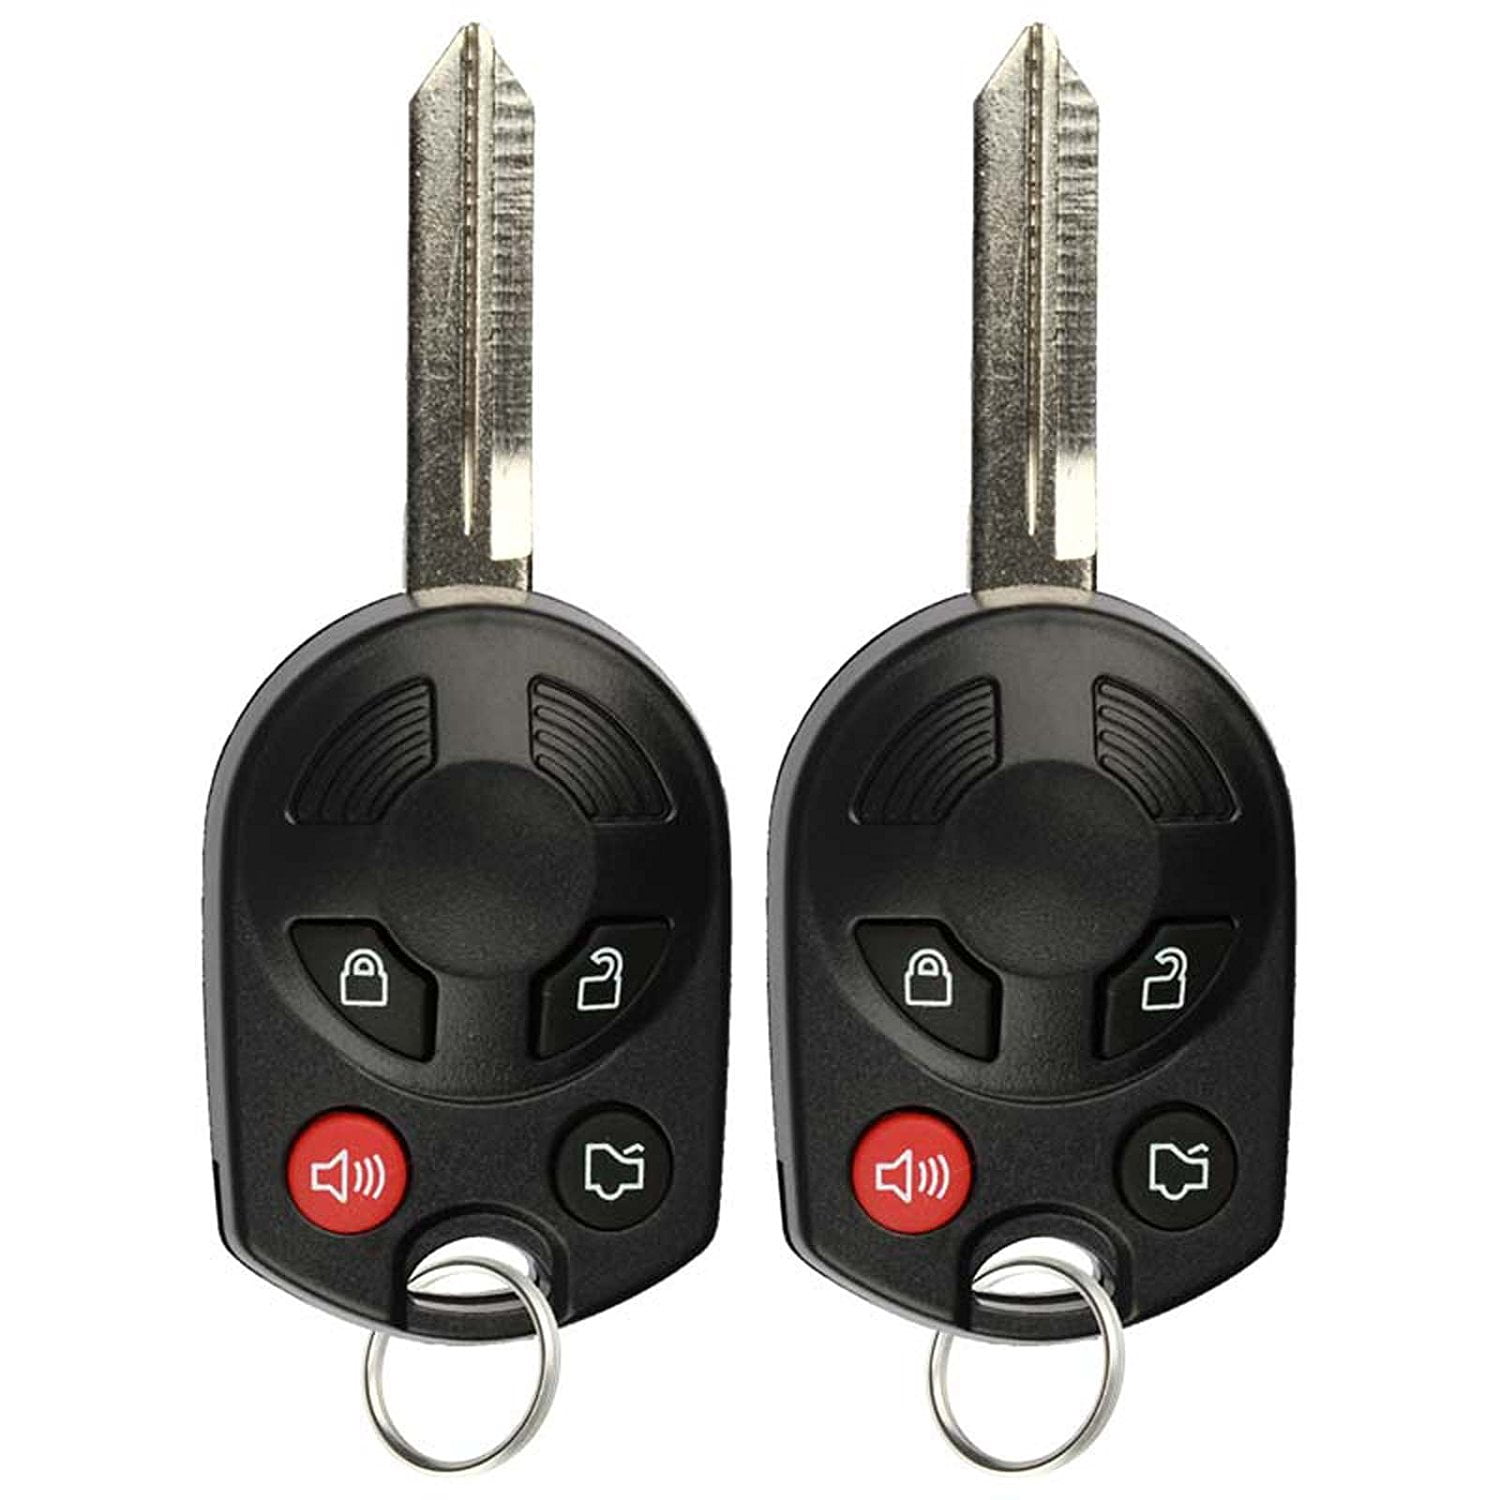 2 New Replacement Keyless Entry Yellow Remote Key Fob For Ford Lincoln Mazda 